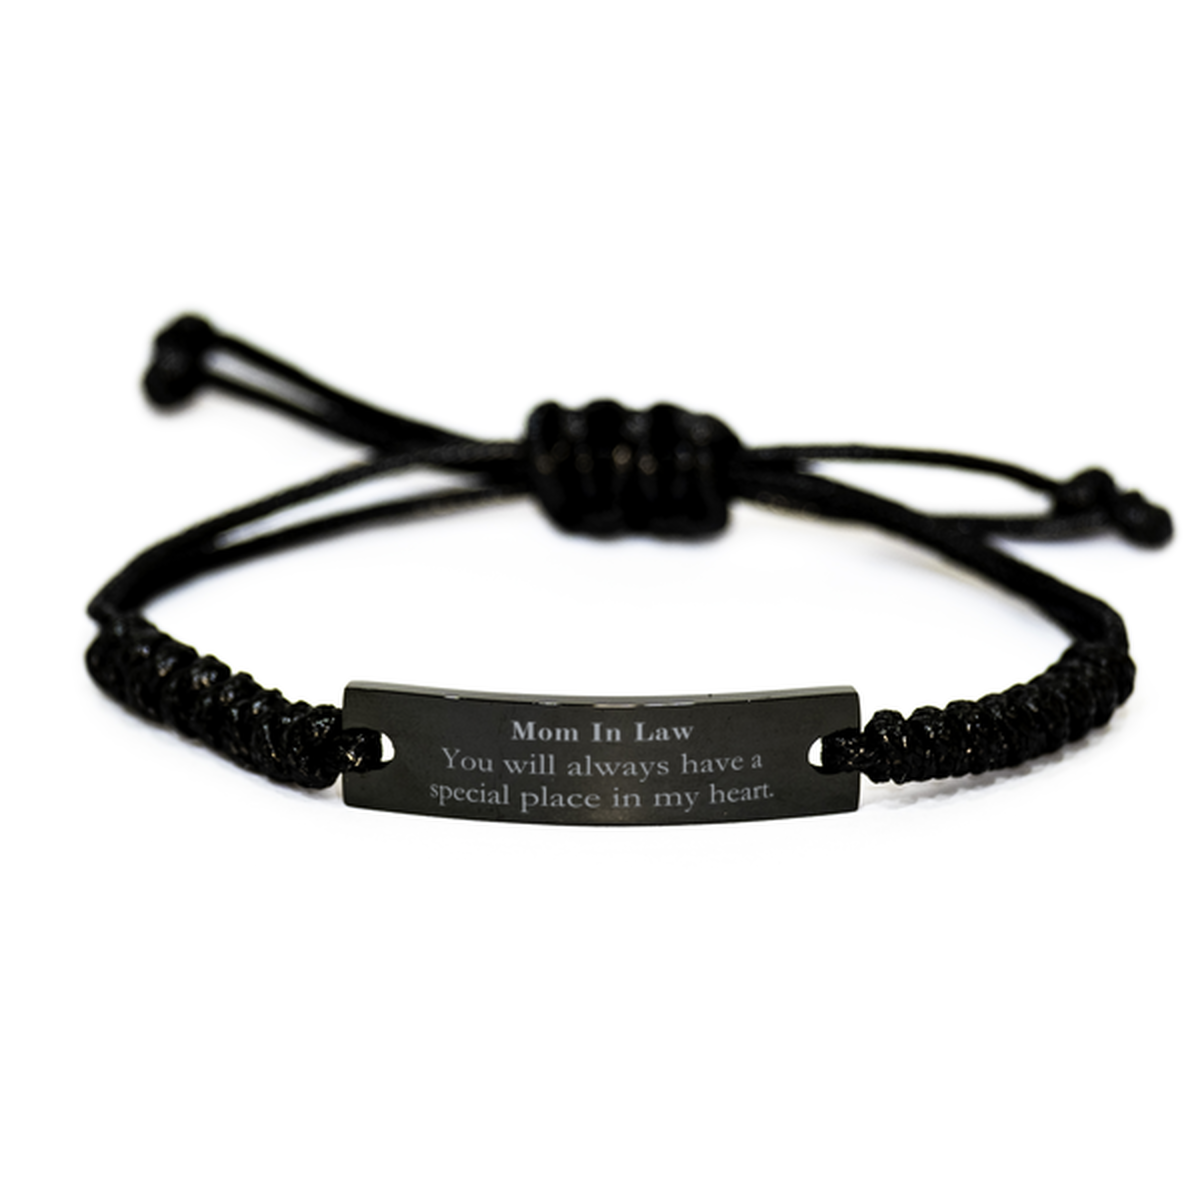 Mom In Law Black Rope Bracelet Engraved Special Place Heart Christmas Gift